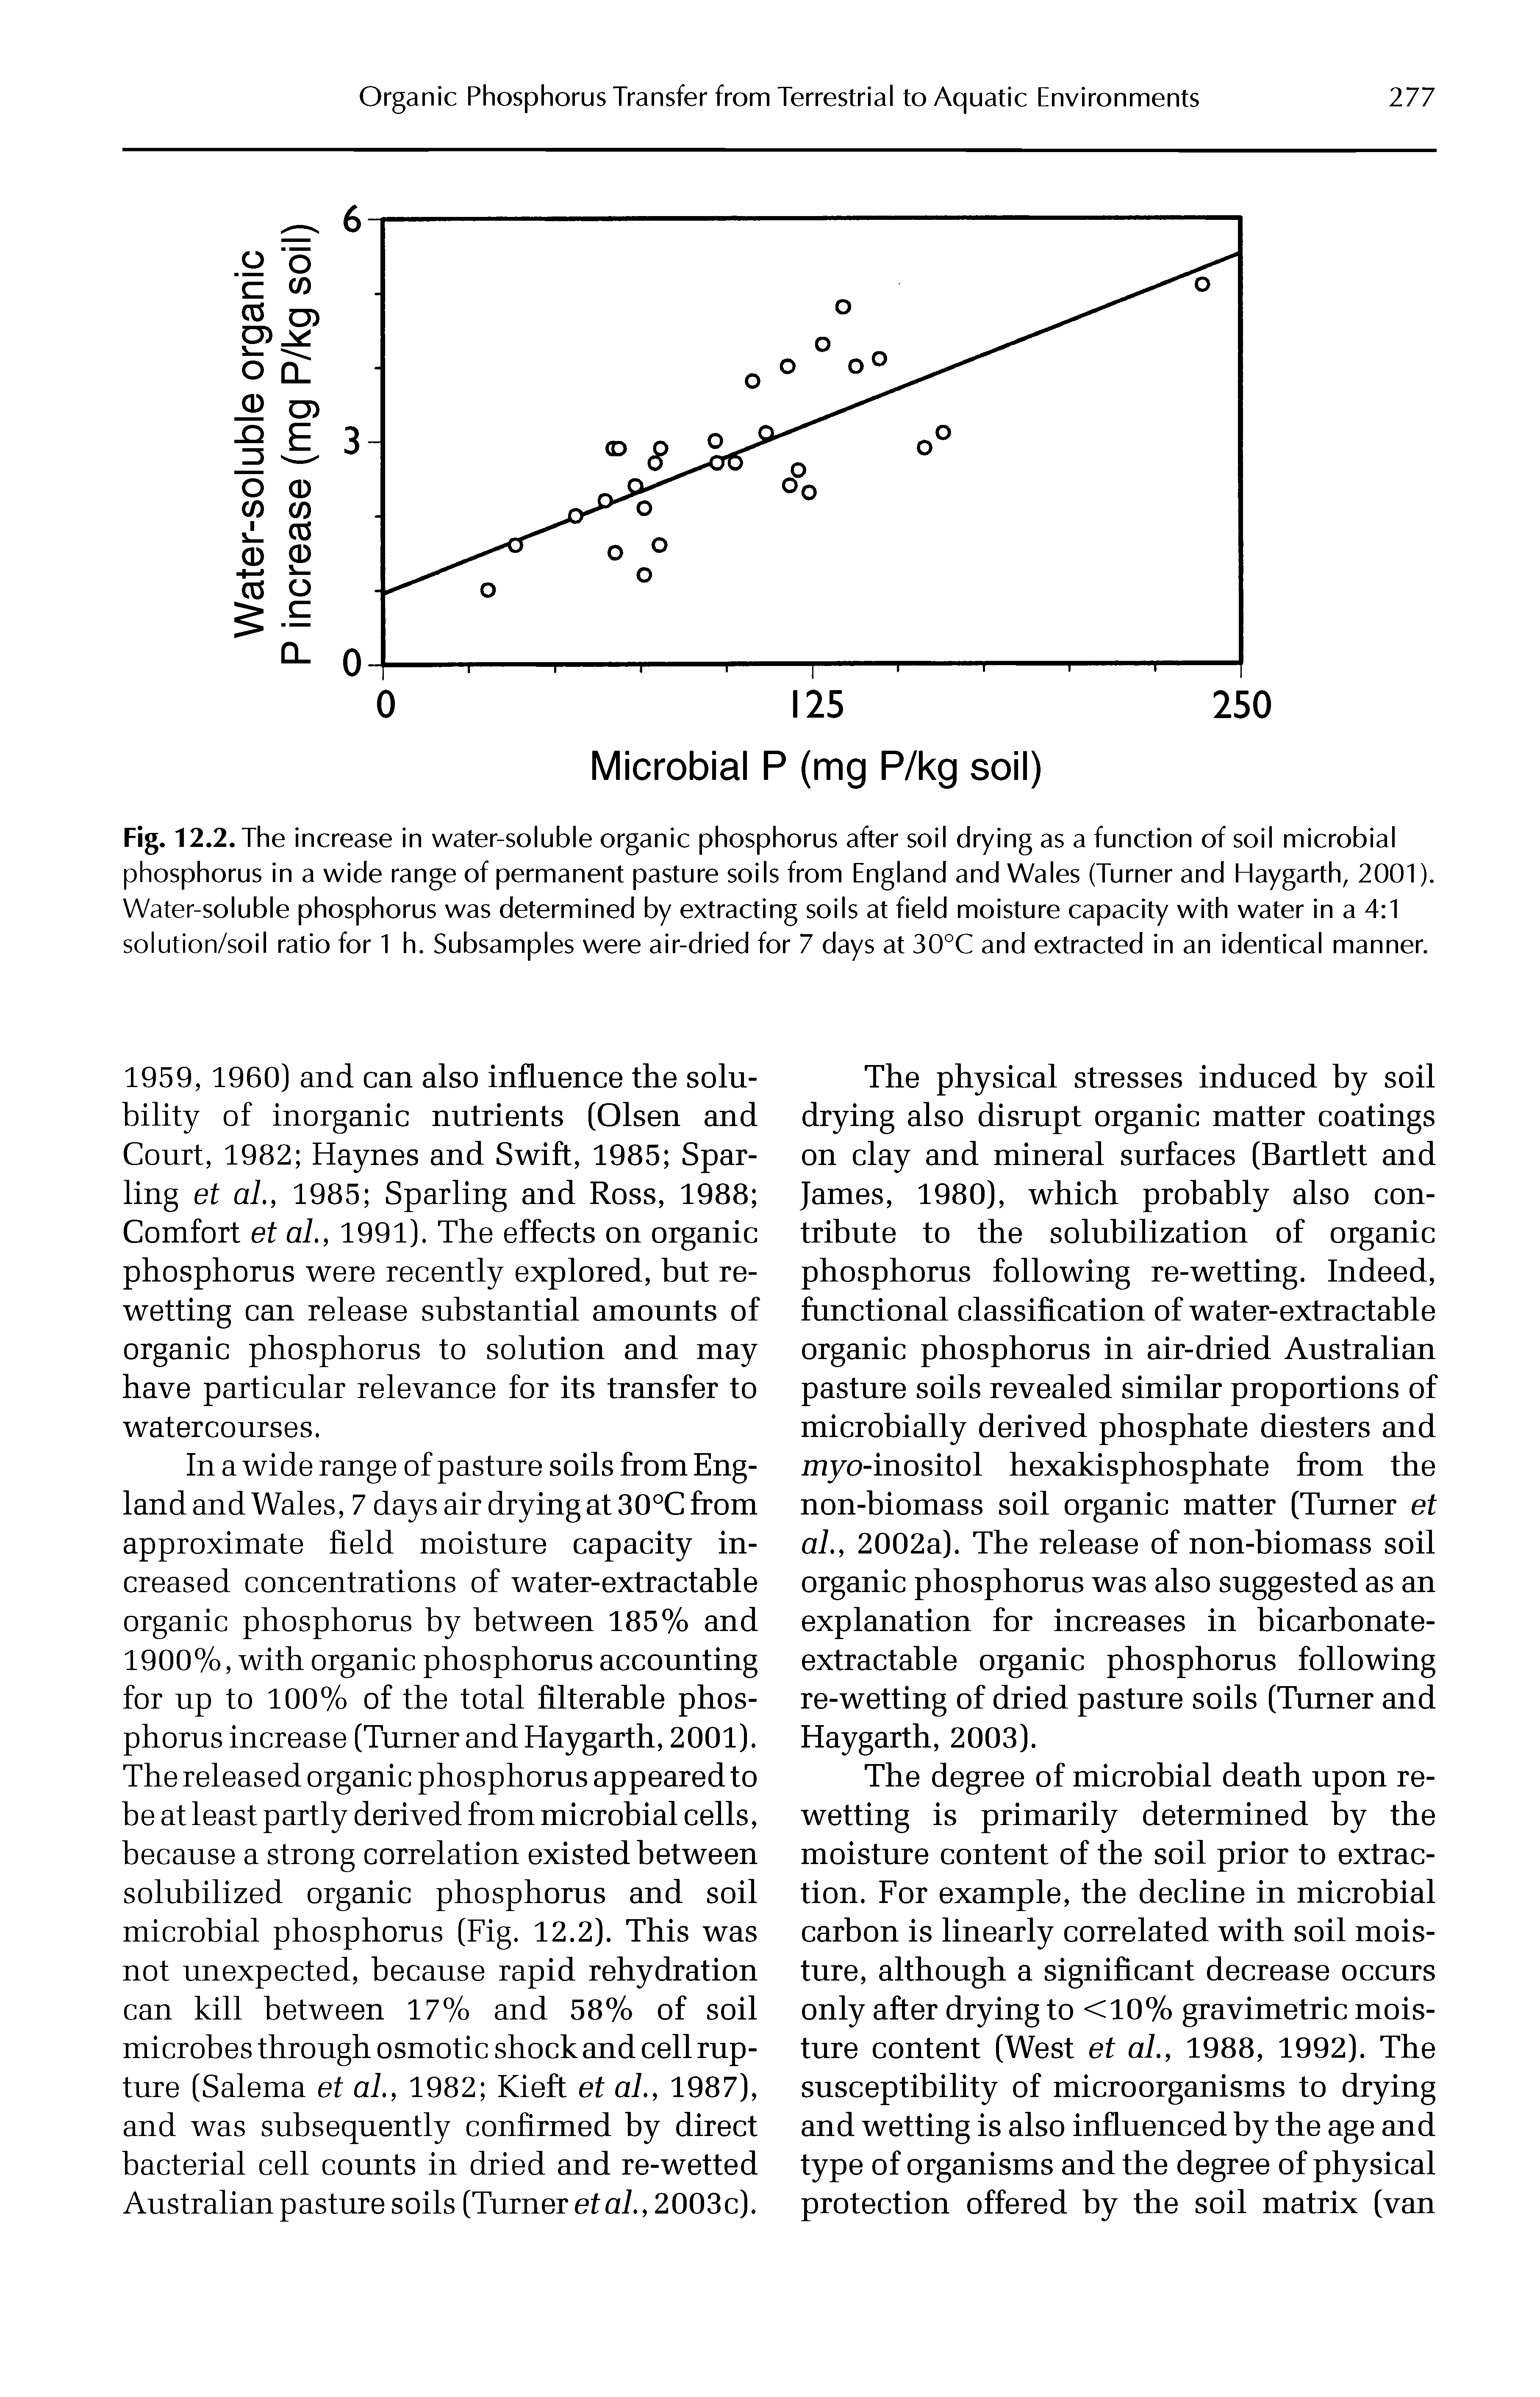 Fig. 12.2. The increase in water-soluble organic phosphorus after soil drying as a function of soil microbial phosphorus in a wide range of permanent pasture soils from England and Wales (Turner and Haygarth, 2001). Water-soluble phosphorus was determined by extracting soils at field moisture capacity with water in a 4 1 solution/soil ratio for 1 h. Subsamples were air-dried for 7 days at 30°C and extracted in an identical manner.